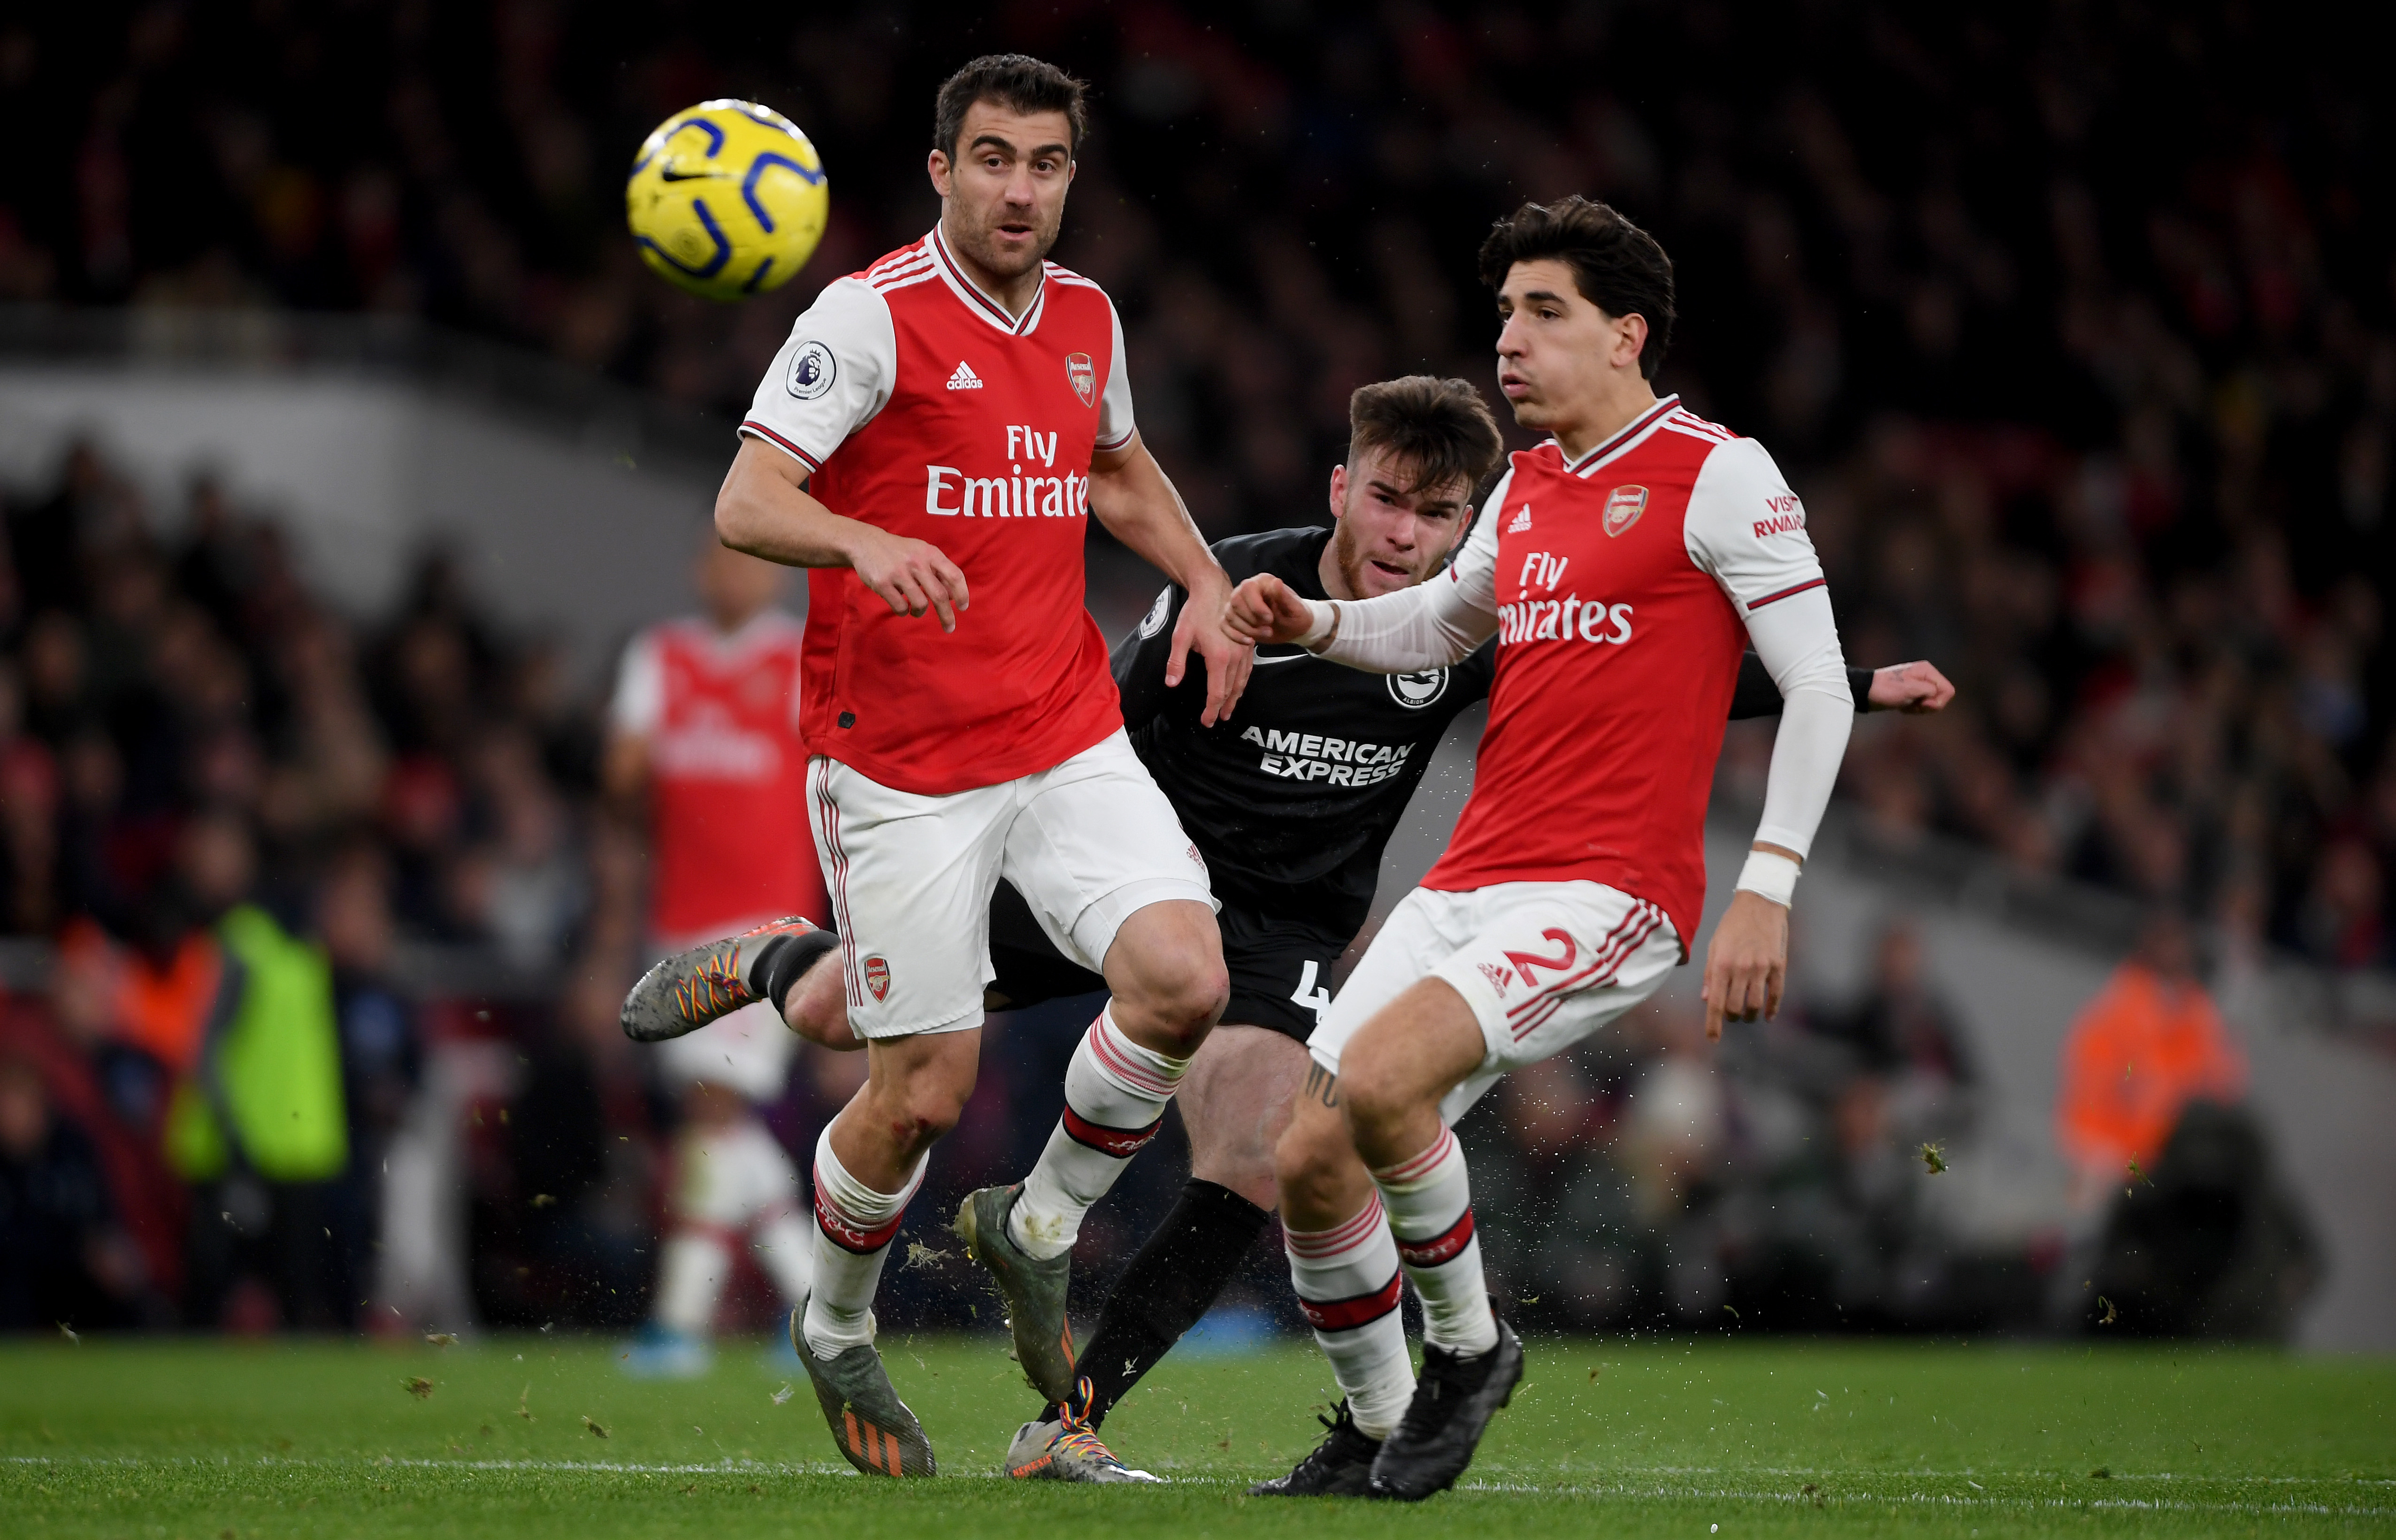 LONDON, ENGLAND - DECEMBER 05: Aaron Connelly of Brighton is challenged by Sokratis of Arsenal and Hector Bellerin of Arsenal during the Premier League match between Arsenal FC and Brighton & Hove Albion at Emirates Stadium on December 05, 2019 in London, United Kingdom. (Photo by Mike Hewitt/Getty Images)